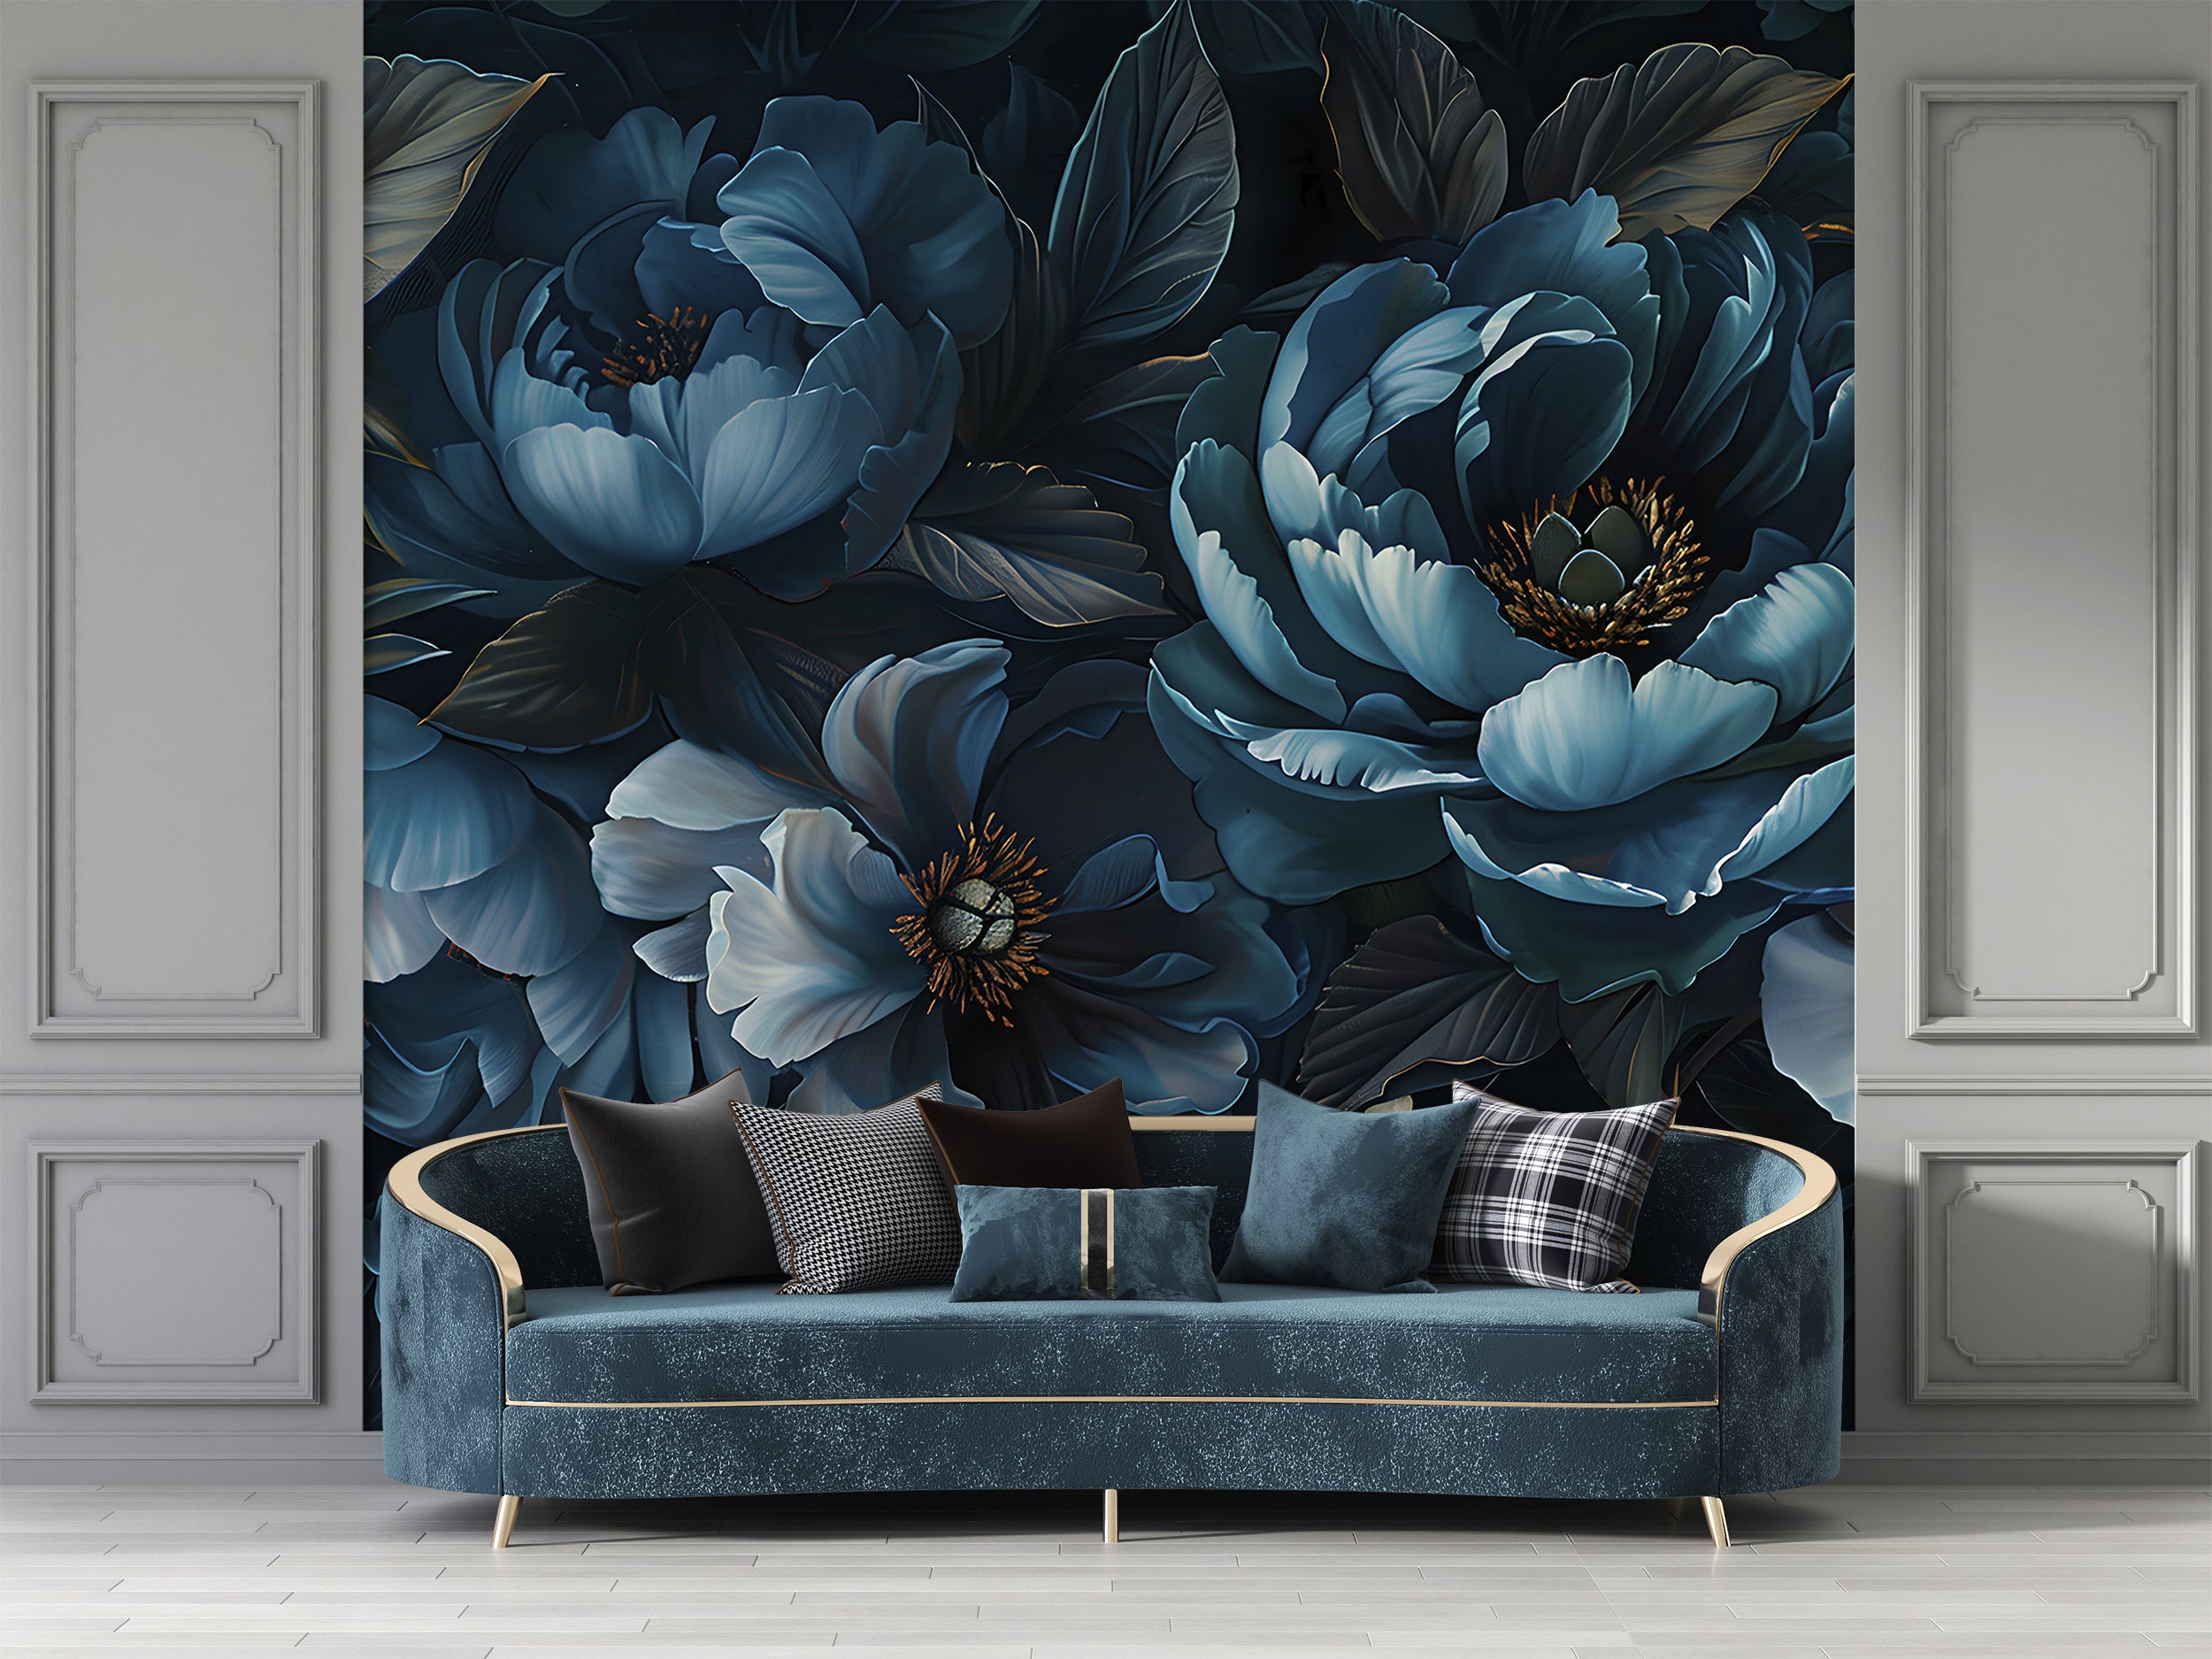 Dark Blue Peonies Mural, Peel and Stick Large Flowers Wallpaper, Removable Deep Blue Floral Wall Decal, Peony Accent Wall Art, PVC free Decor